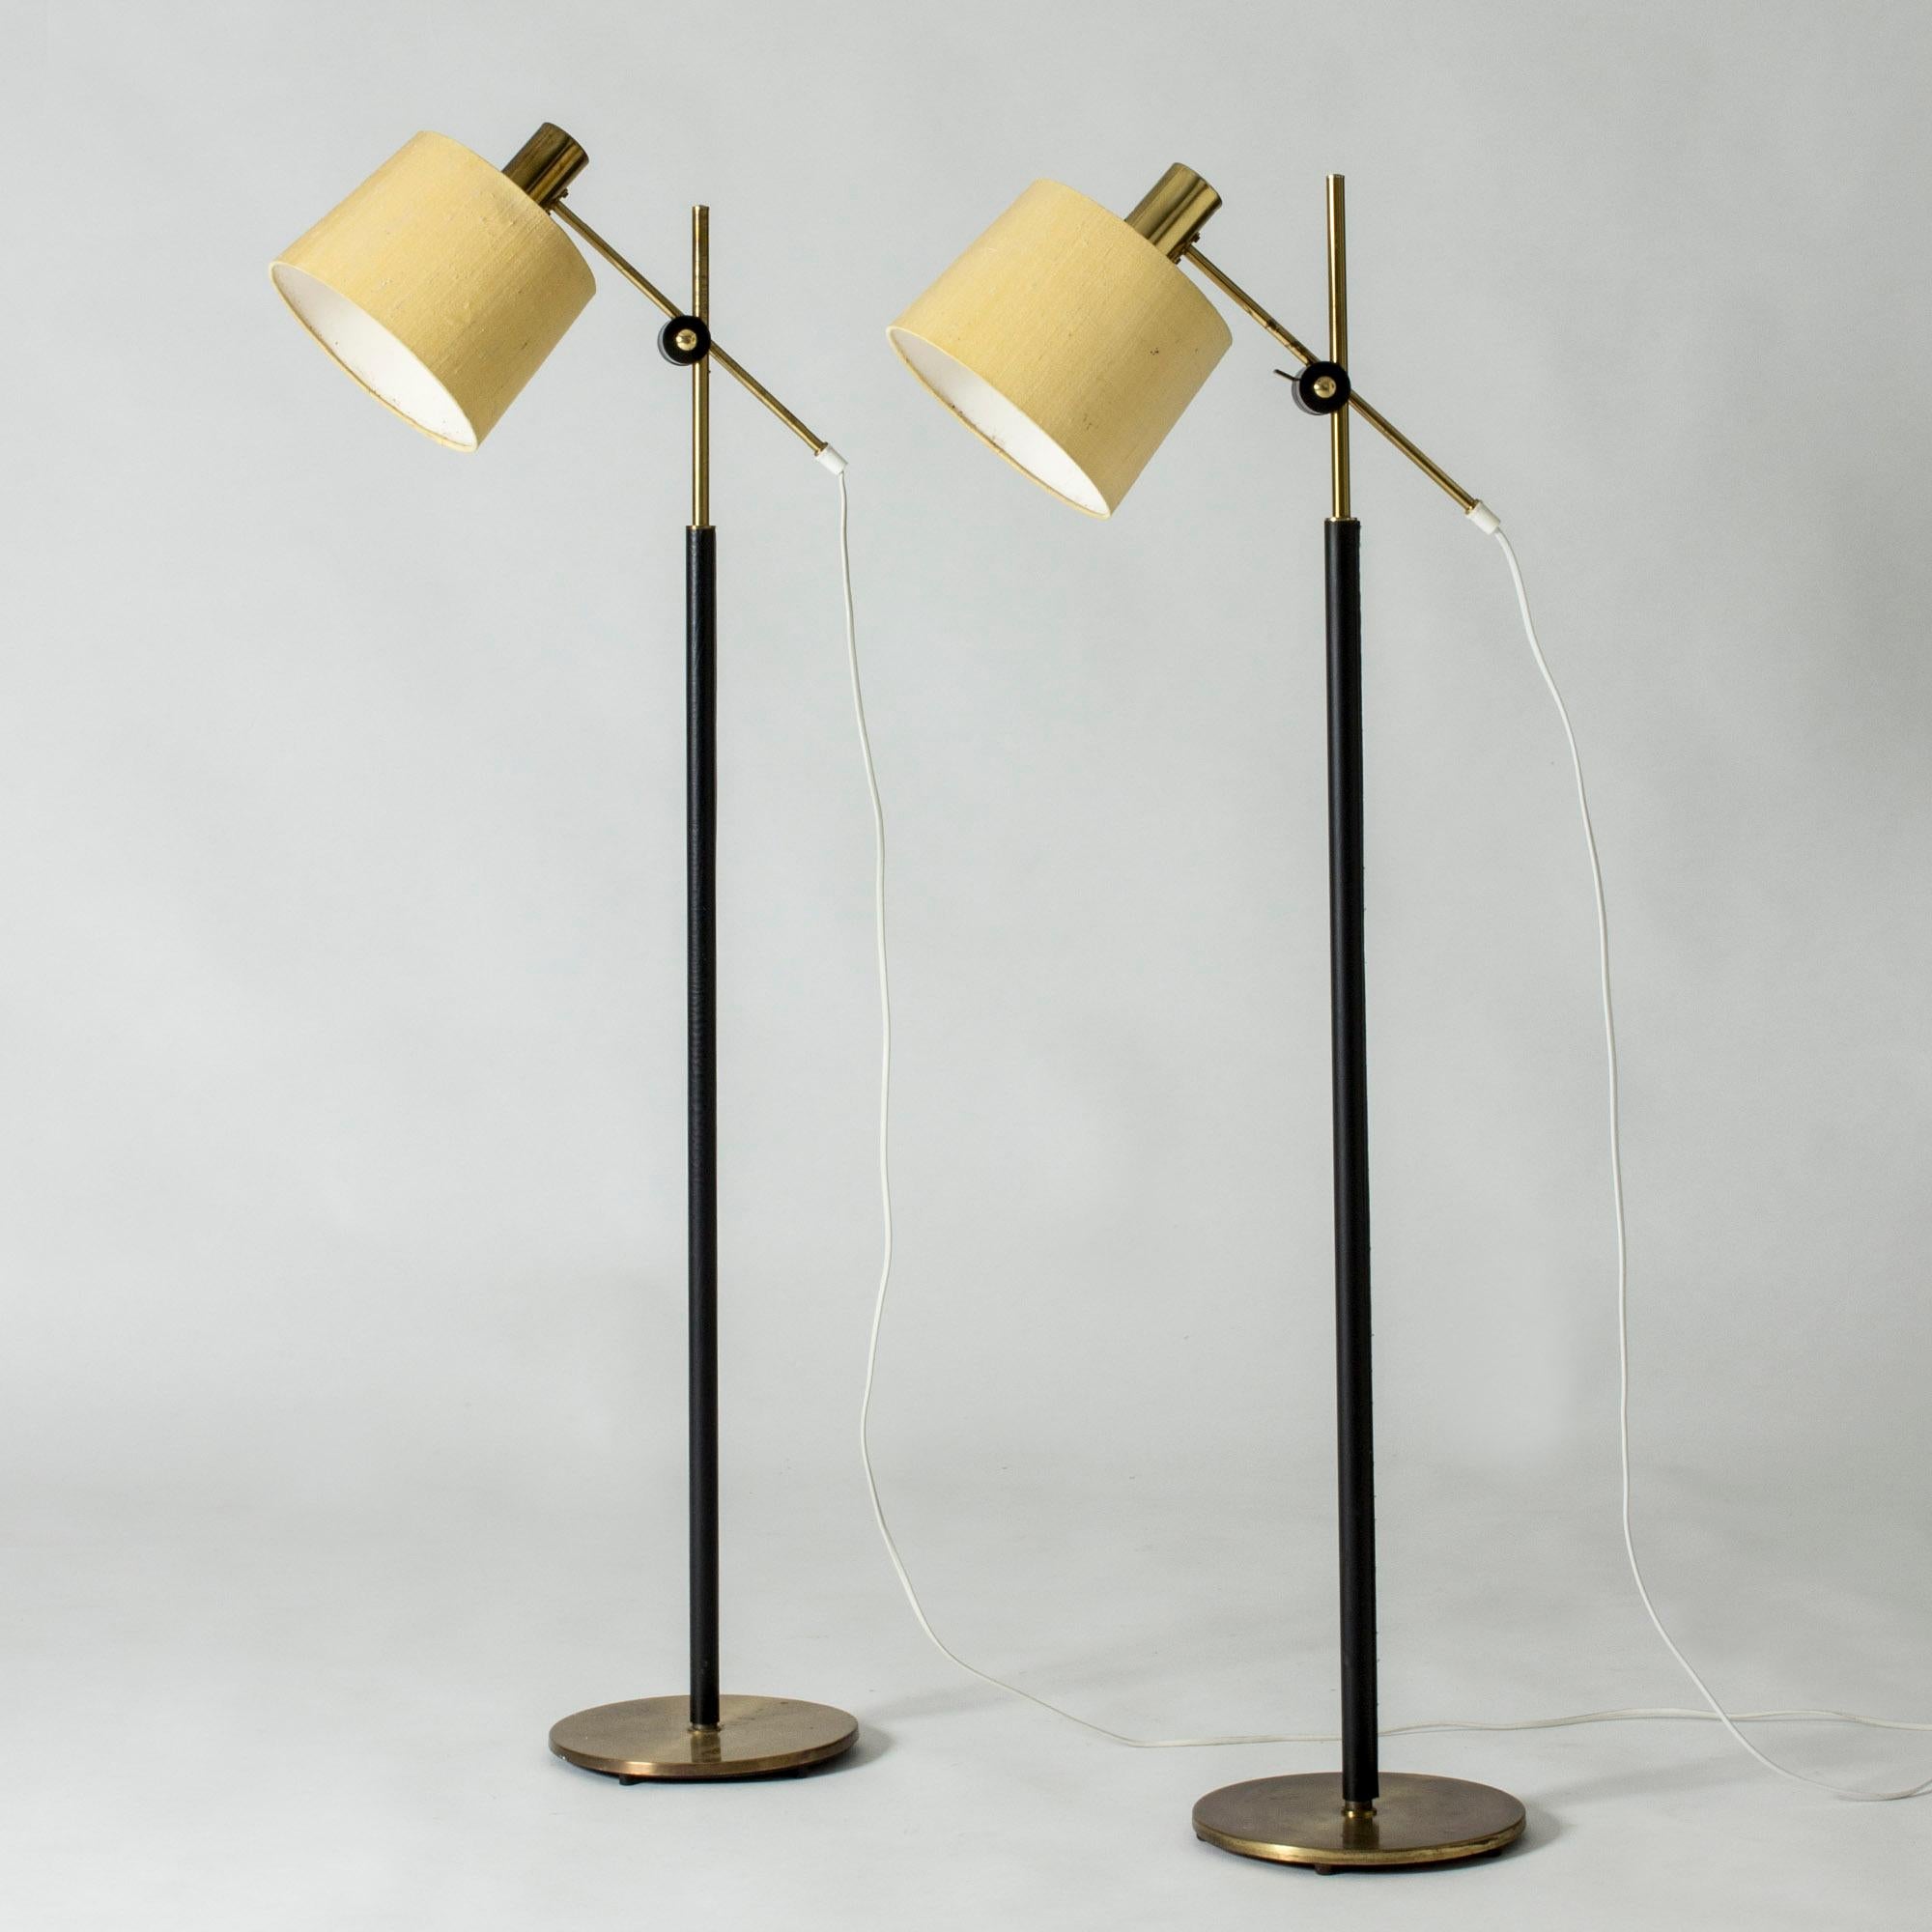 Pair of brass floor lamps from Falkenbergs Belysning. Elegant screw solution for adjusting the angle of the necks. Stems dressed with black leather. Original raw silk shades.